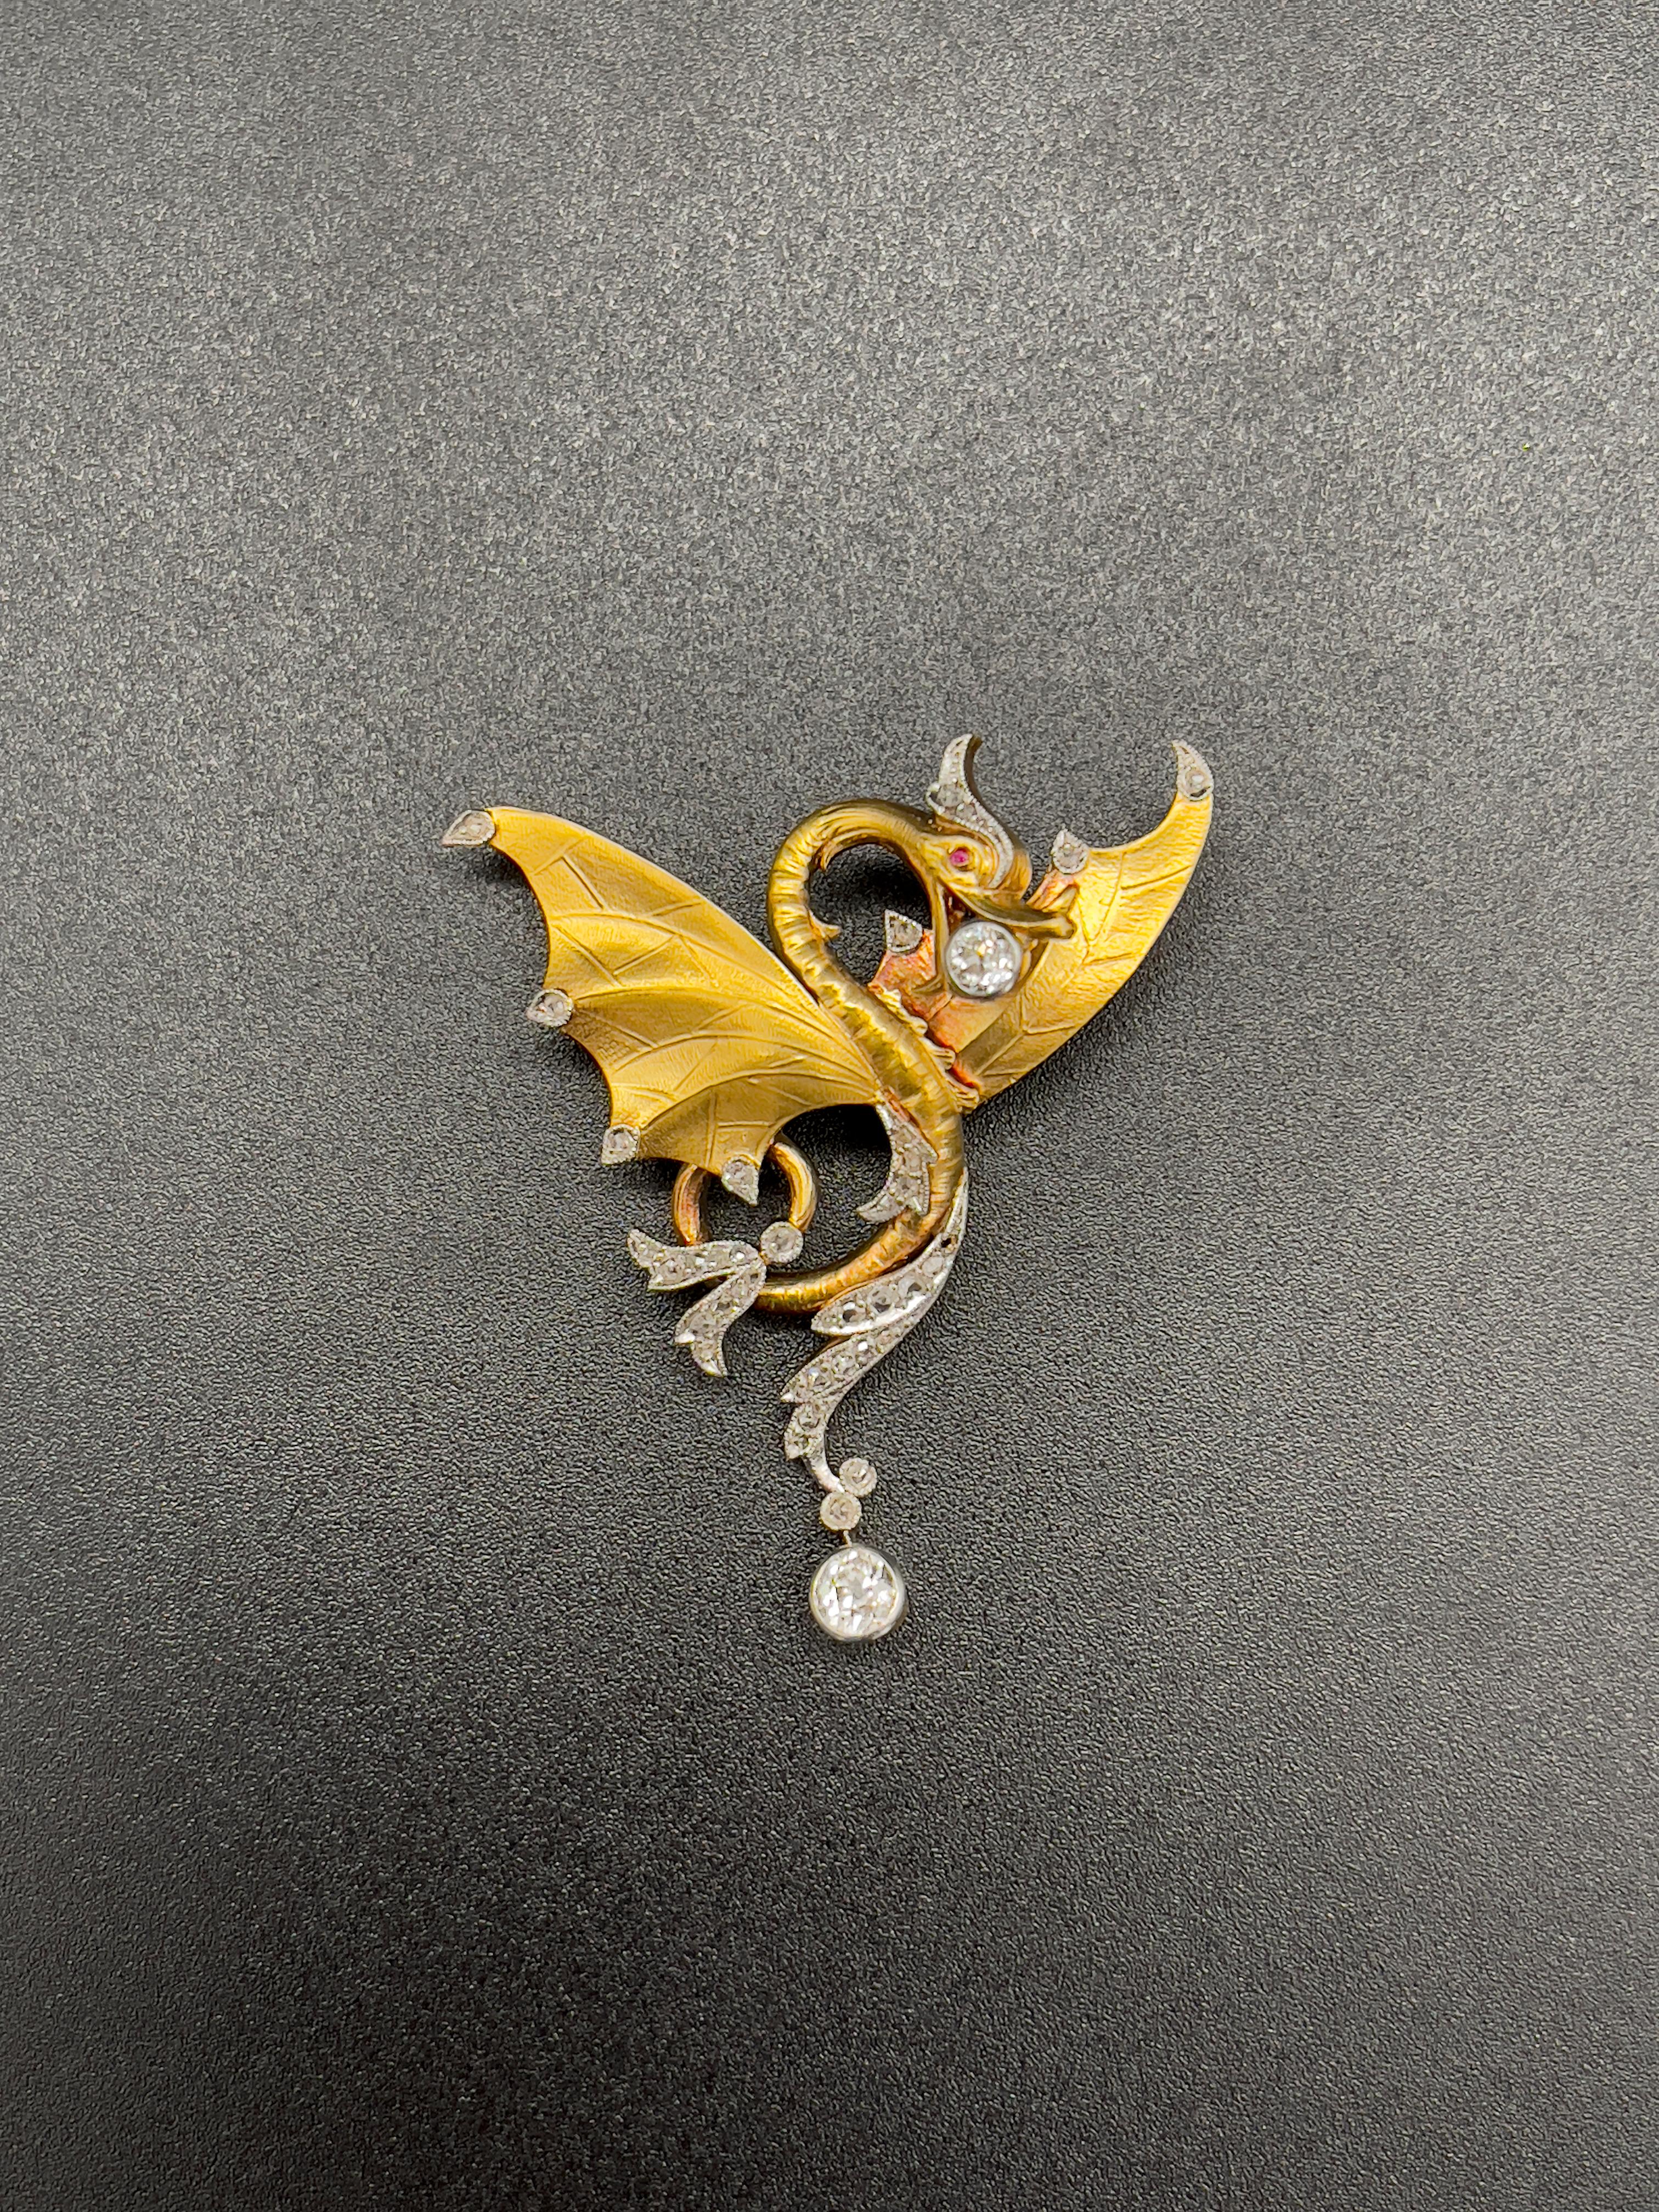  Animal Dragon Diamonds Gold 1890s Chinese Imperial Pendant or Brooch For Sale 3